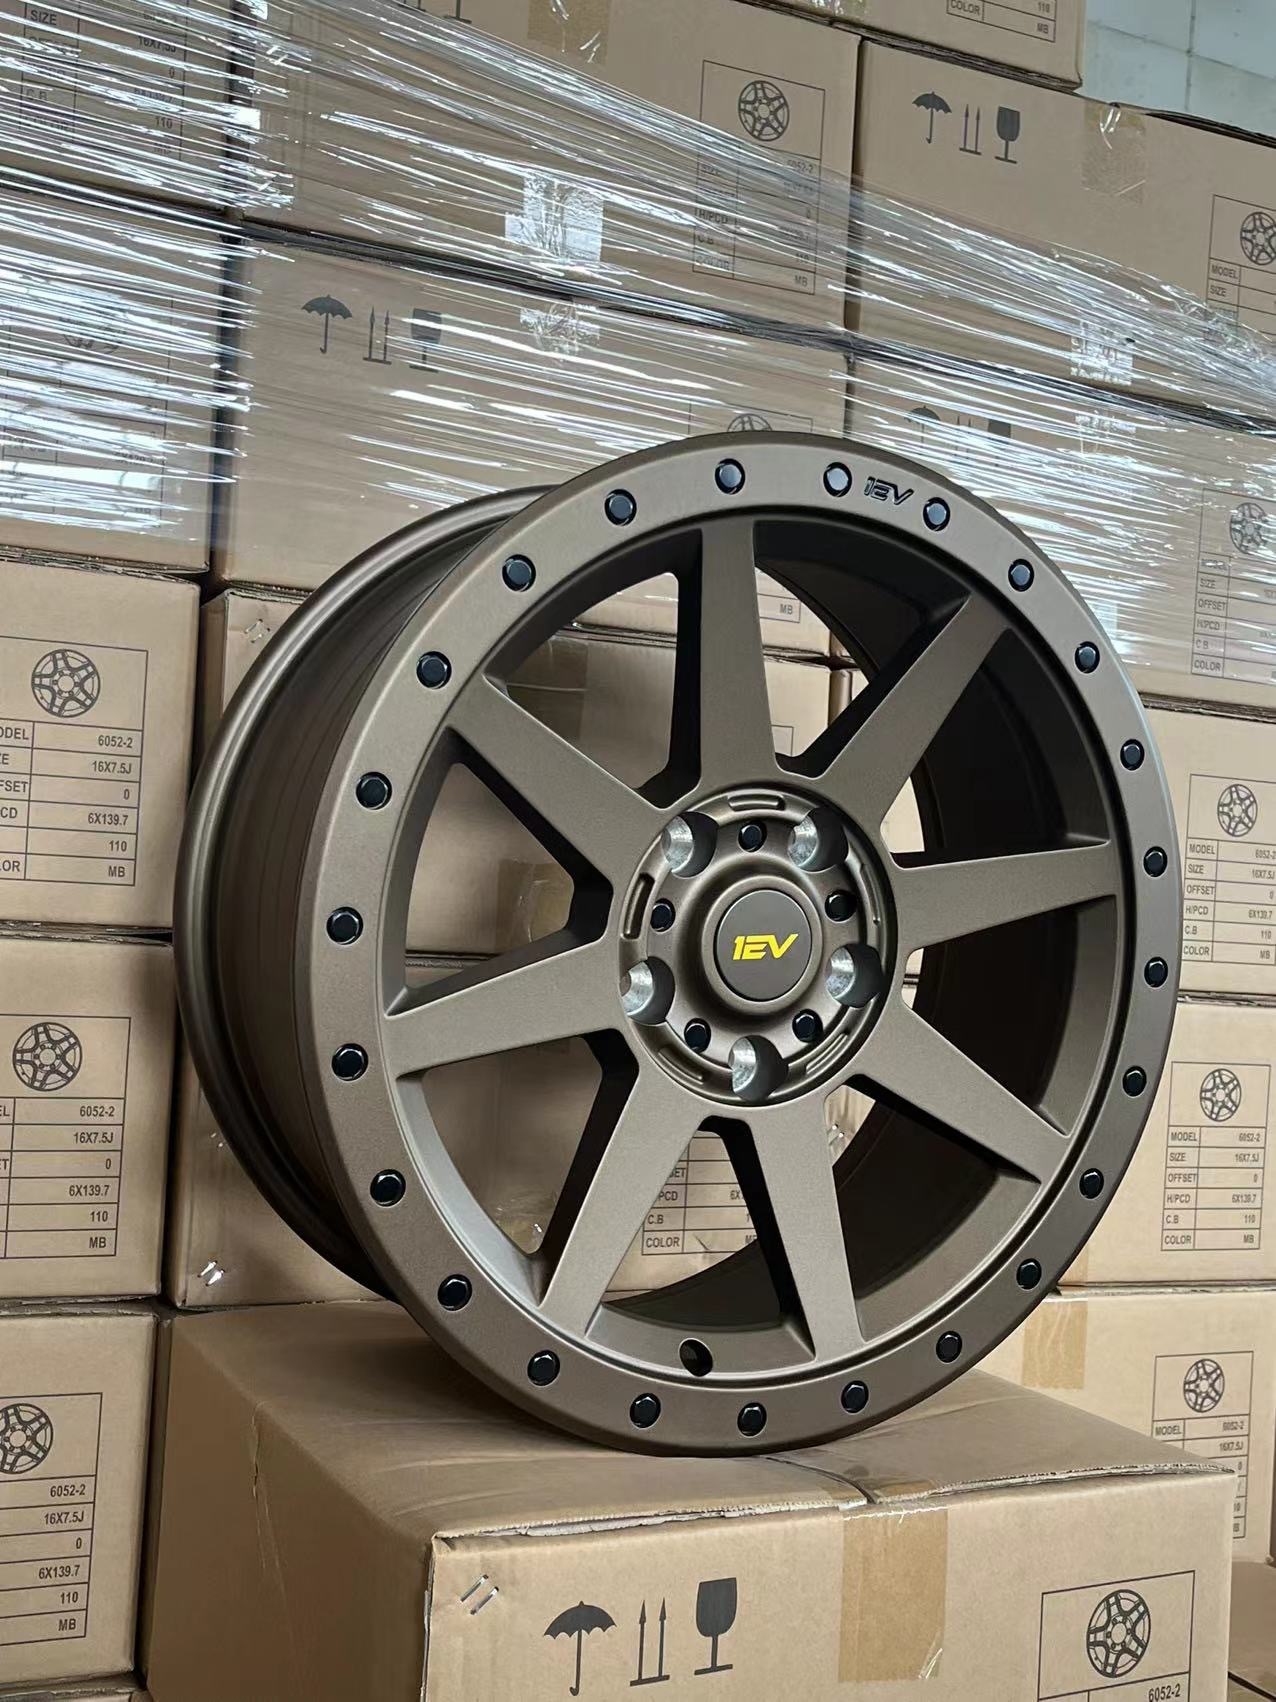 Rivian R1T R1S New Wheels Launched for Rivian R1T / R1S from Team 1EV - R1000 Adventure and R800 Compass 461c3a4a1ebaceaa4cc5a69768932954.JPG